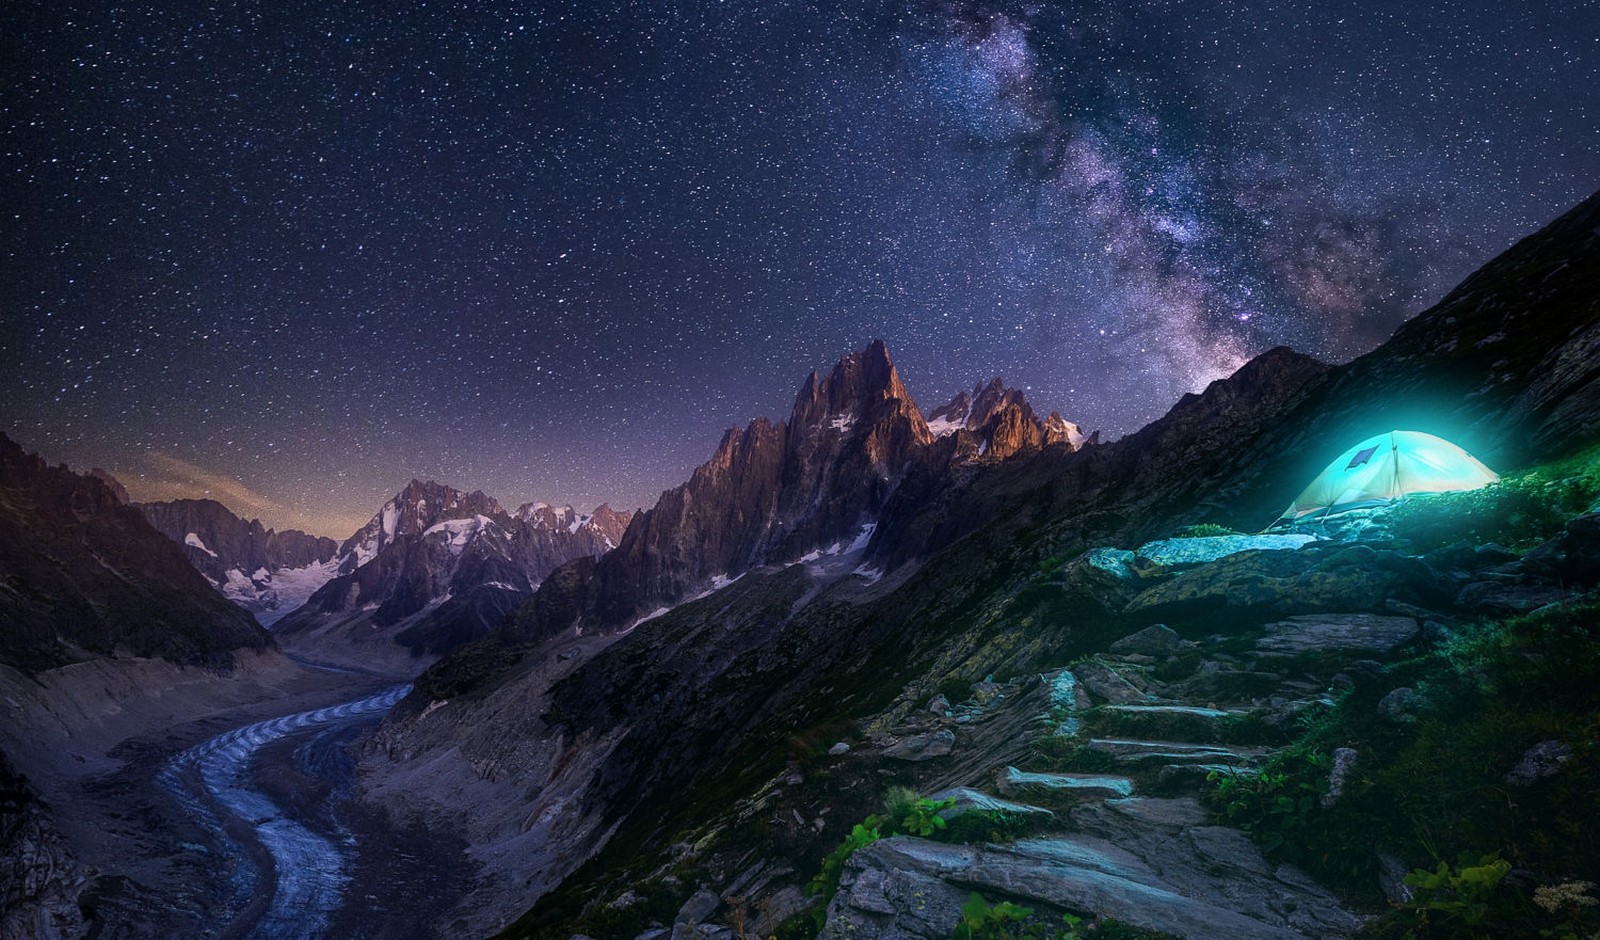 General 1600x940 landscape photography nature Milky Way mountains glacier starry night camping snow lights peace long exposure cyan stars